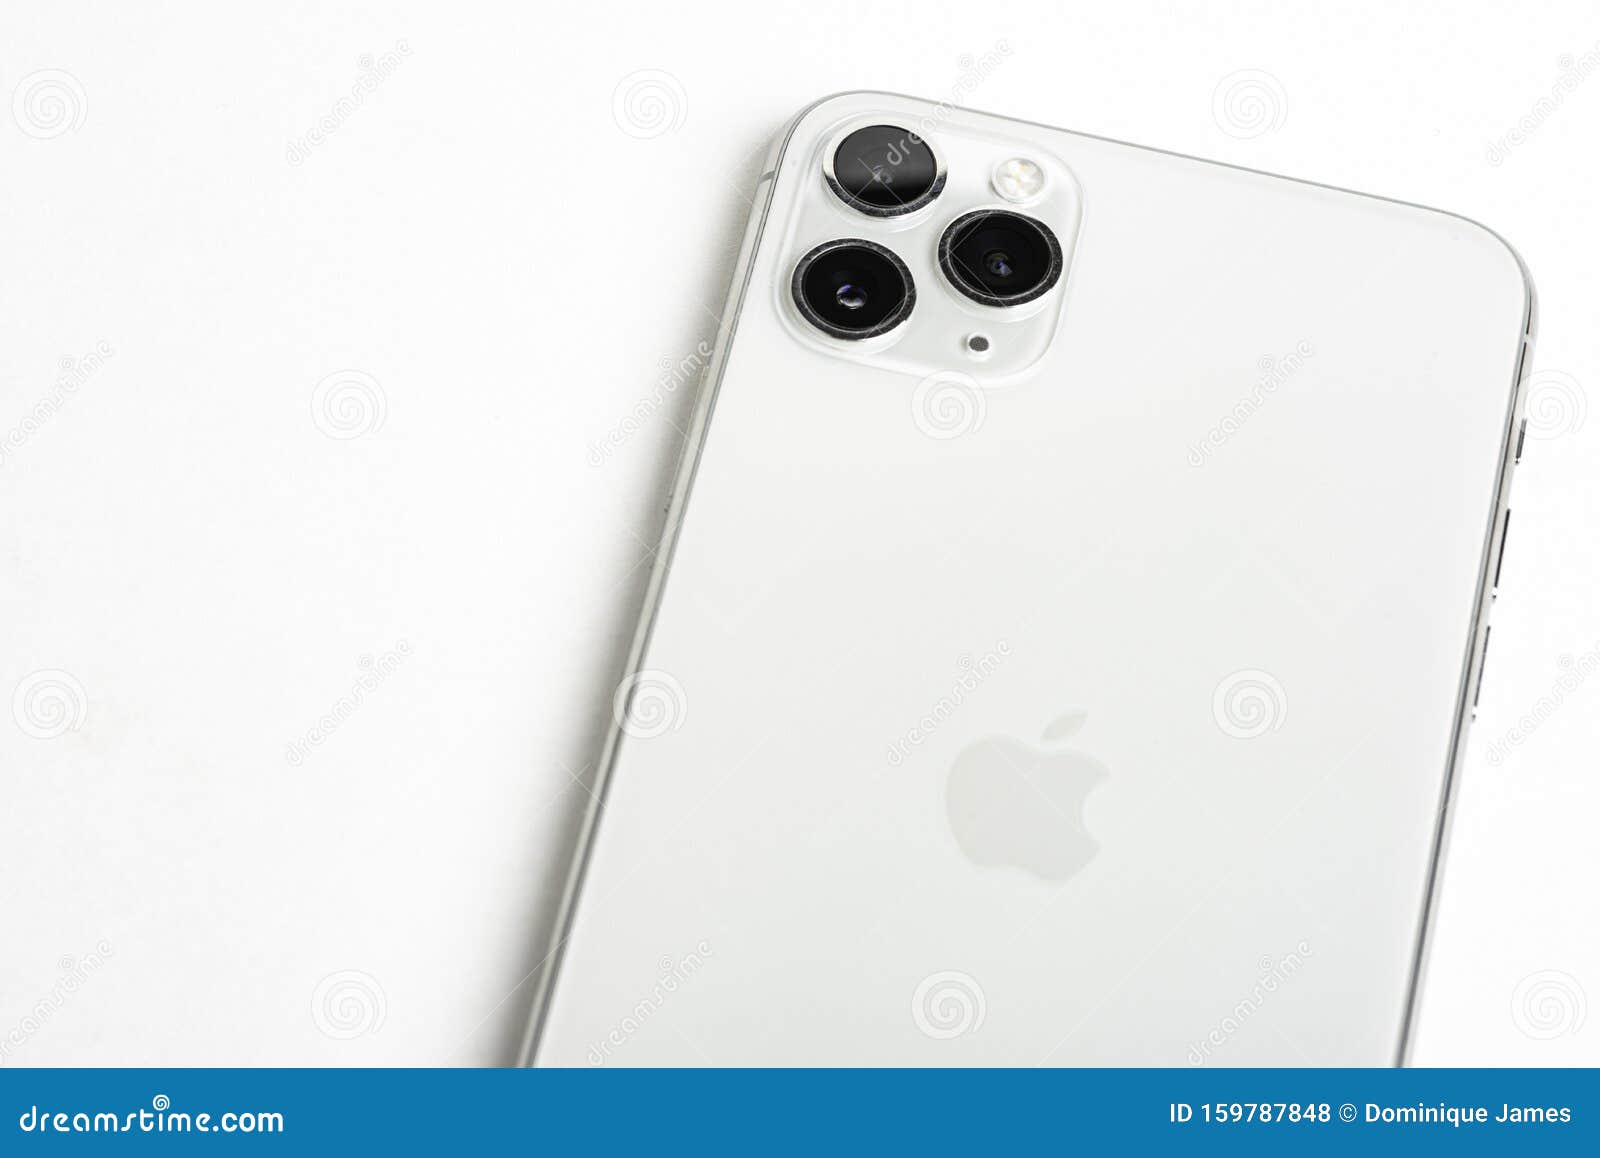 Iphone 11 Pro Max Silver Editorial Stock Photo Image Of Everyday